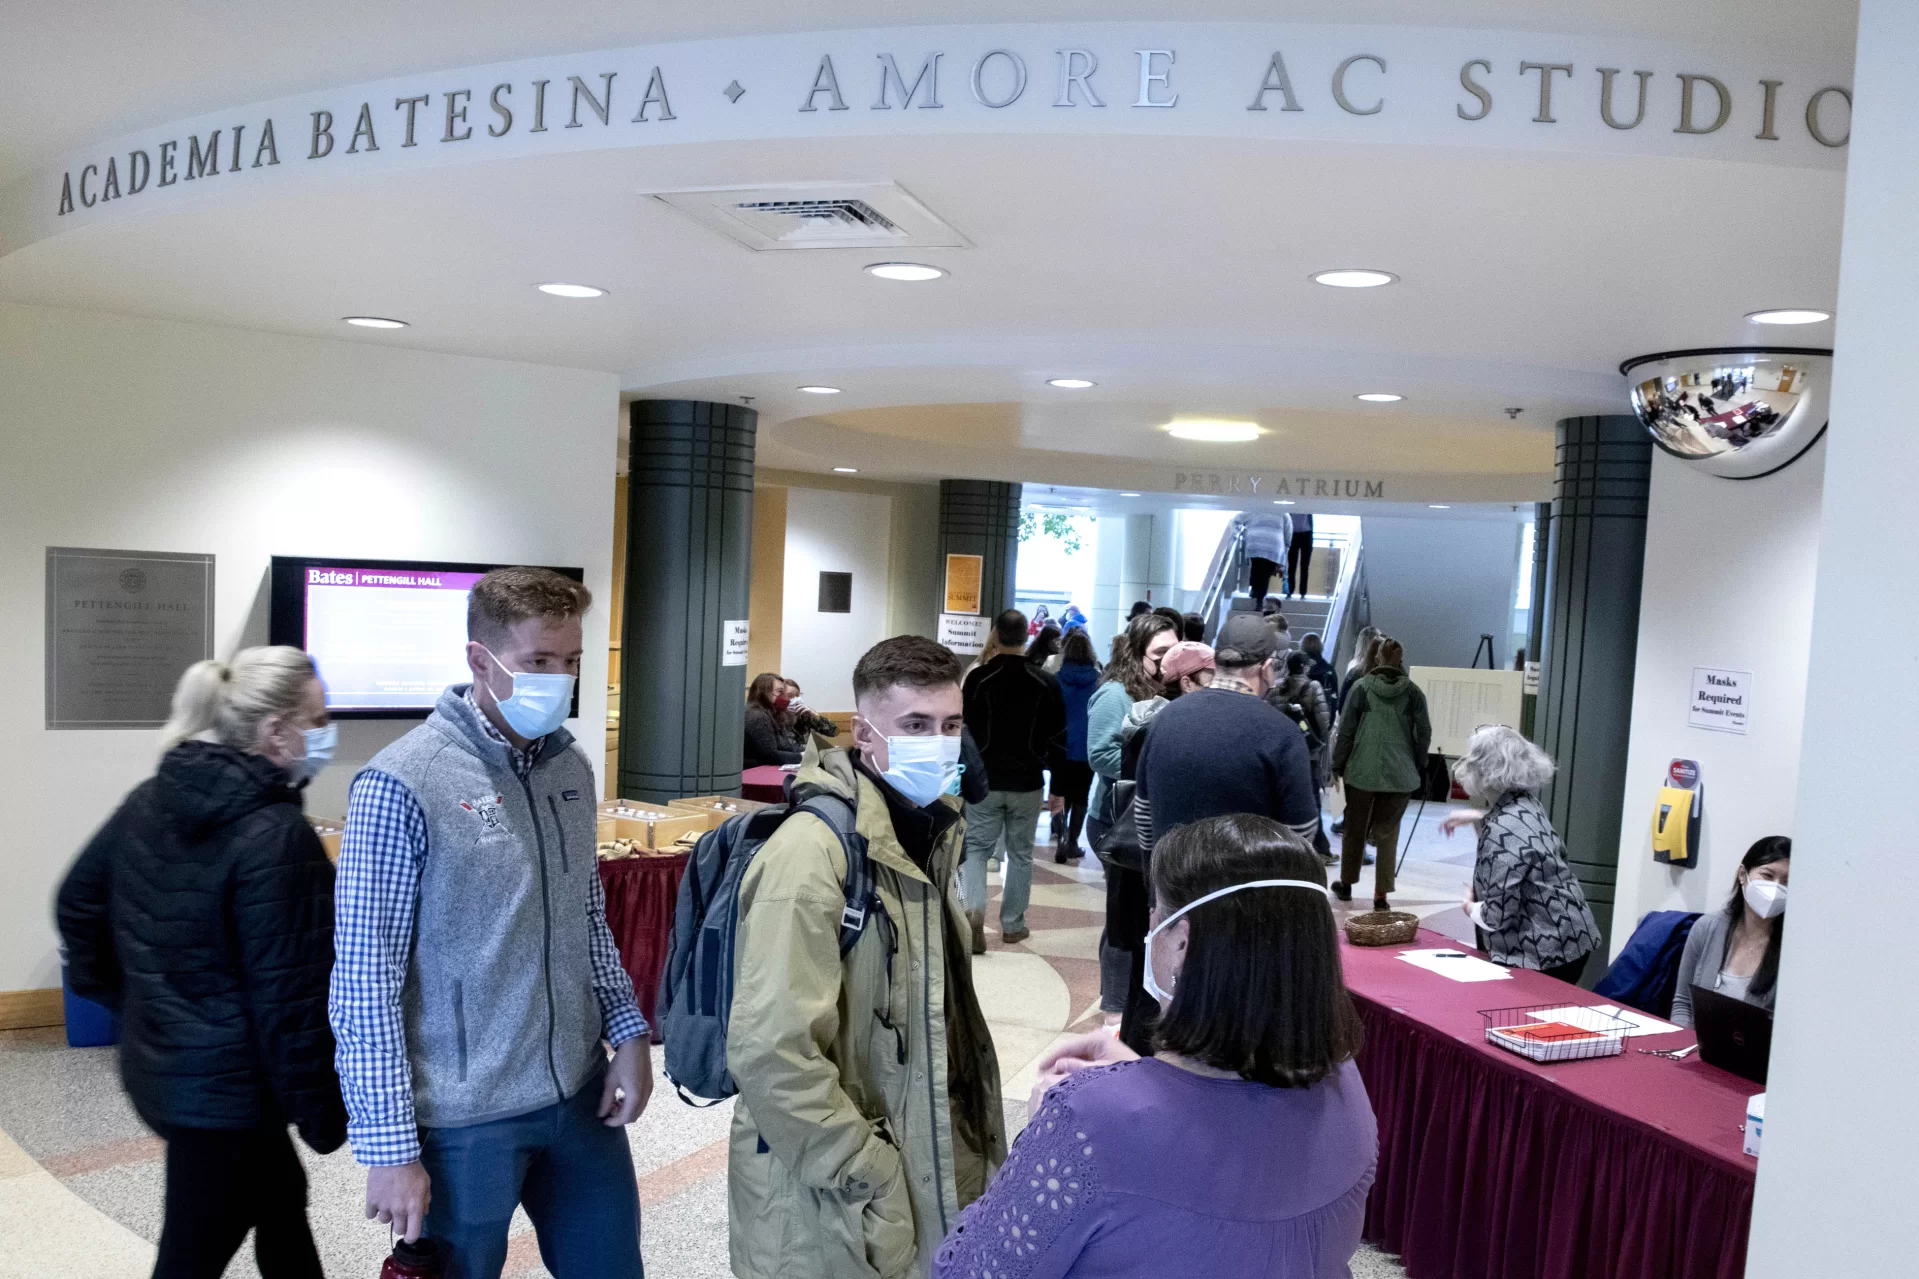 The Mount David Summit, a the annual celebration of student academic achievement and community at Bates College, took place on April 8, 2022, in Pettengill Hall.